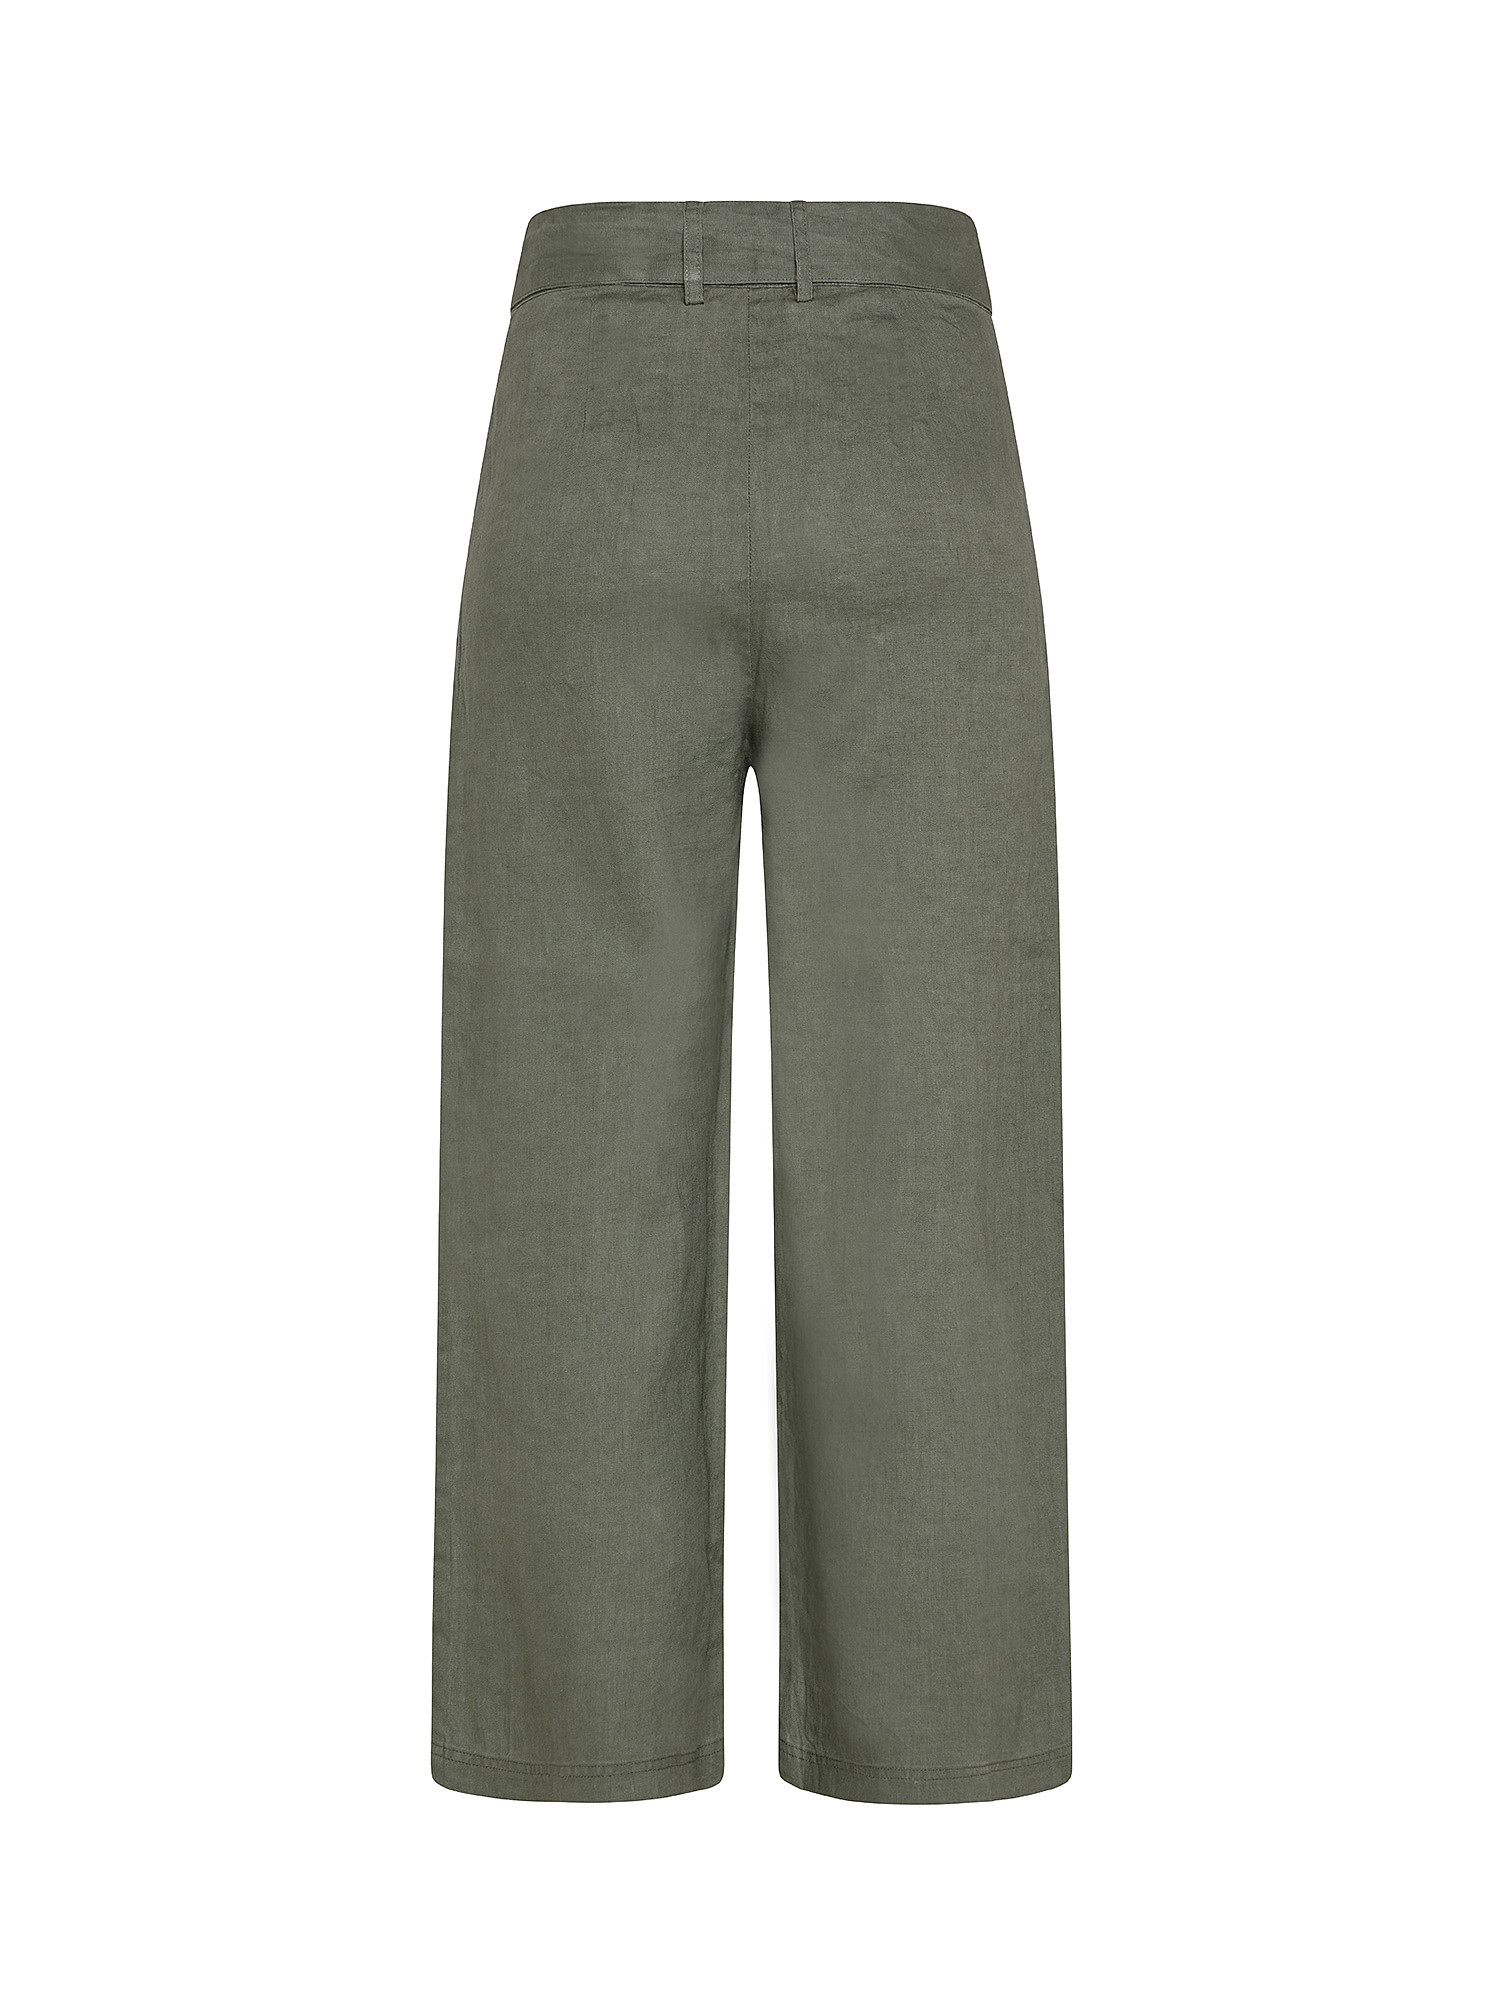 Pure linen 3/4 trousers with belt, Green, large image number 1